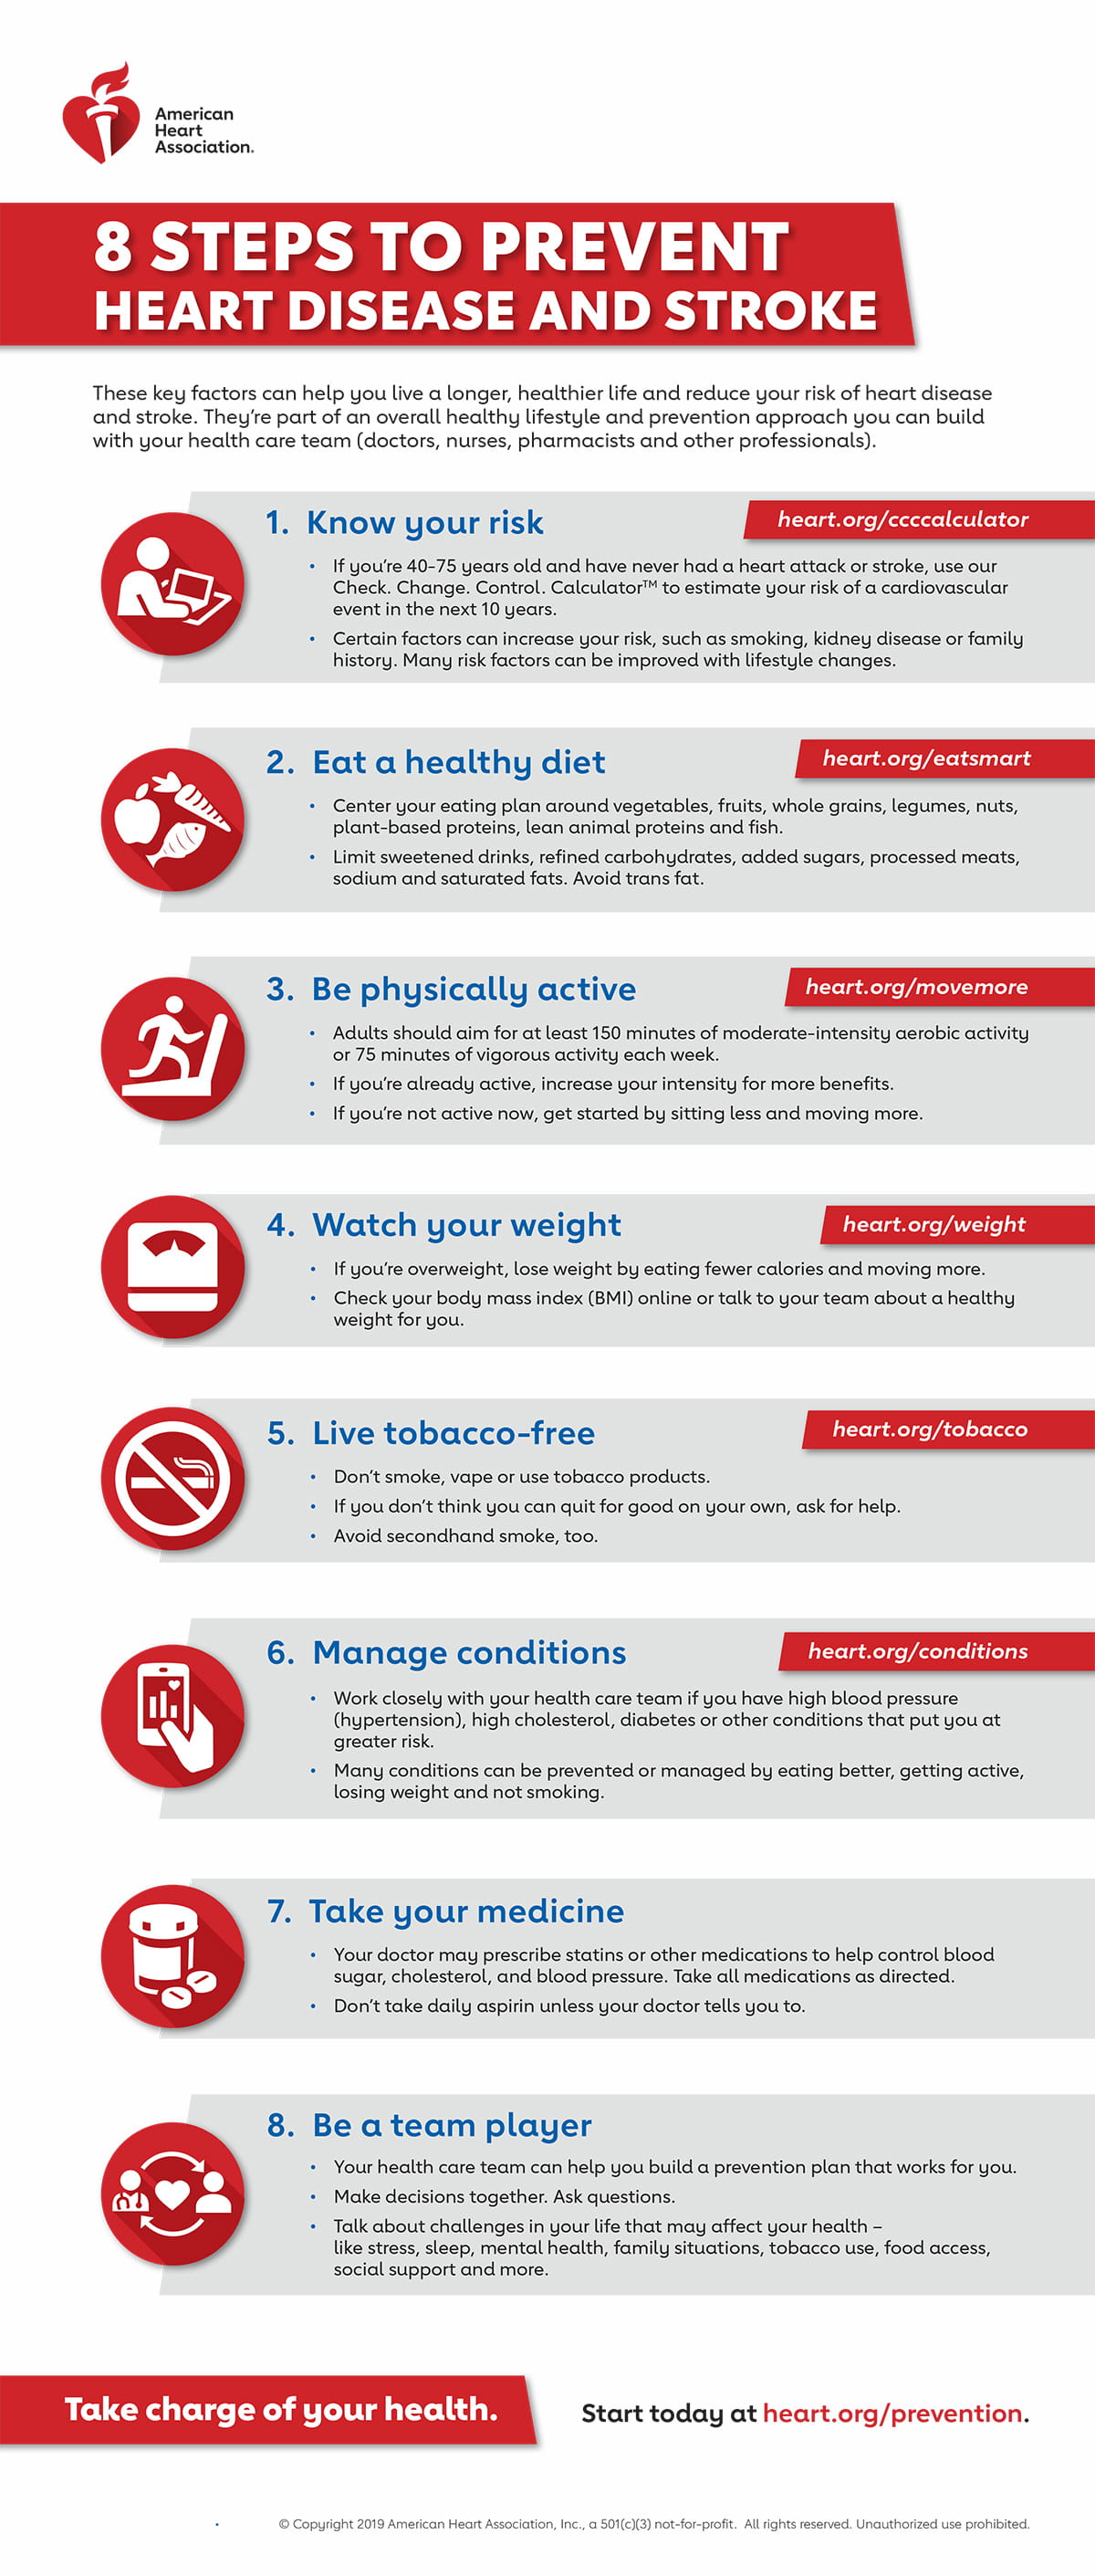 8 steps to prevent heart disease and stroke